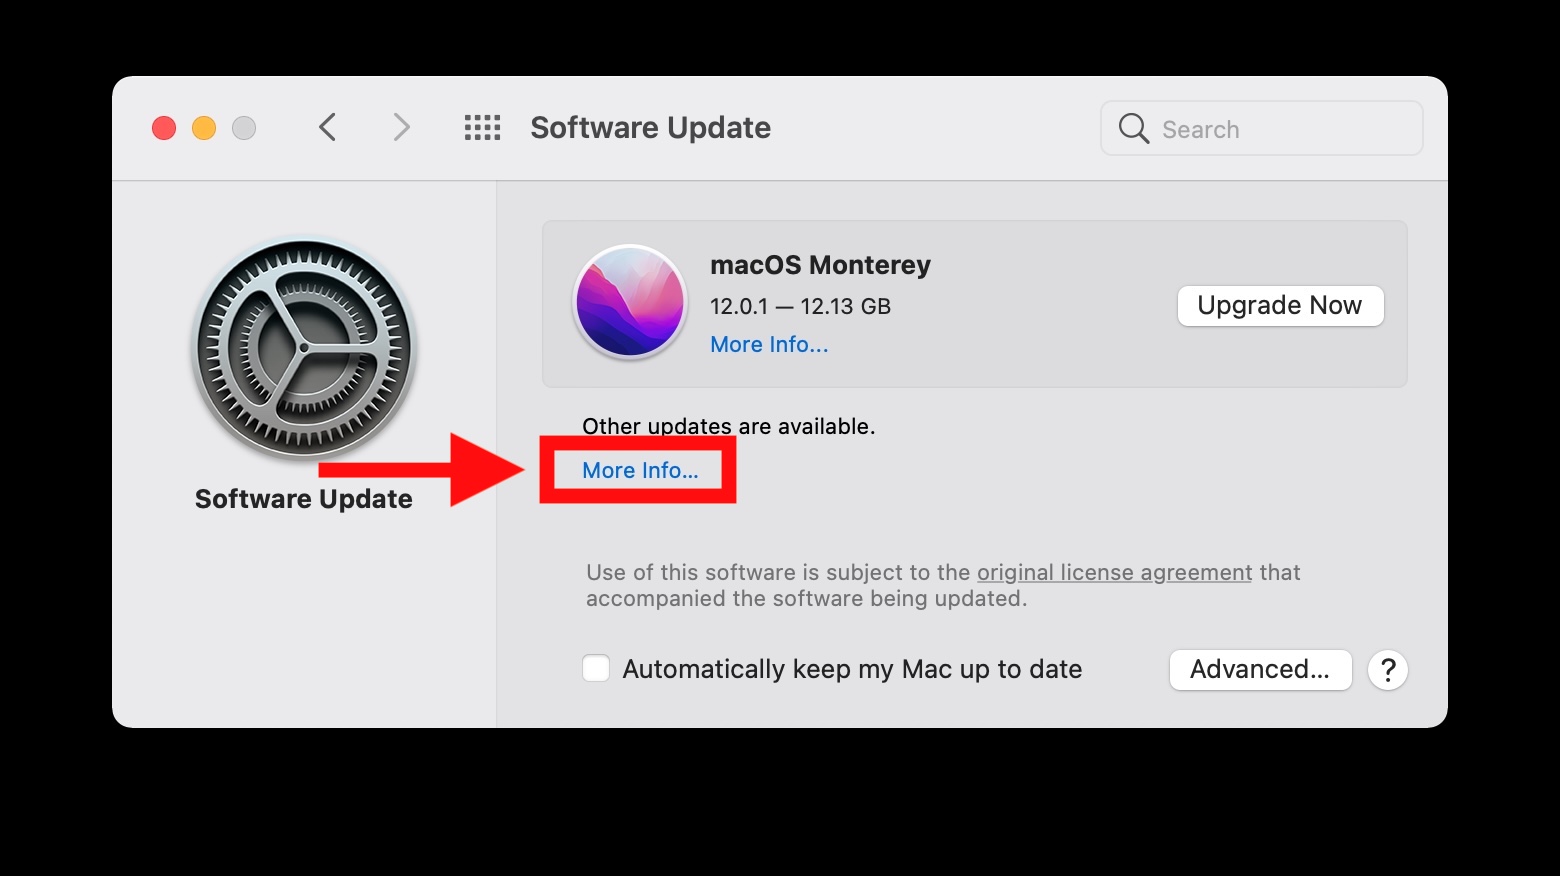 How to Install macOS Updates without Installing MacOS Monterey?